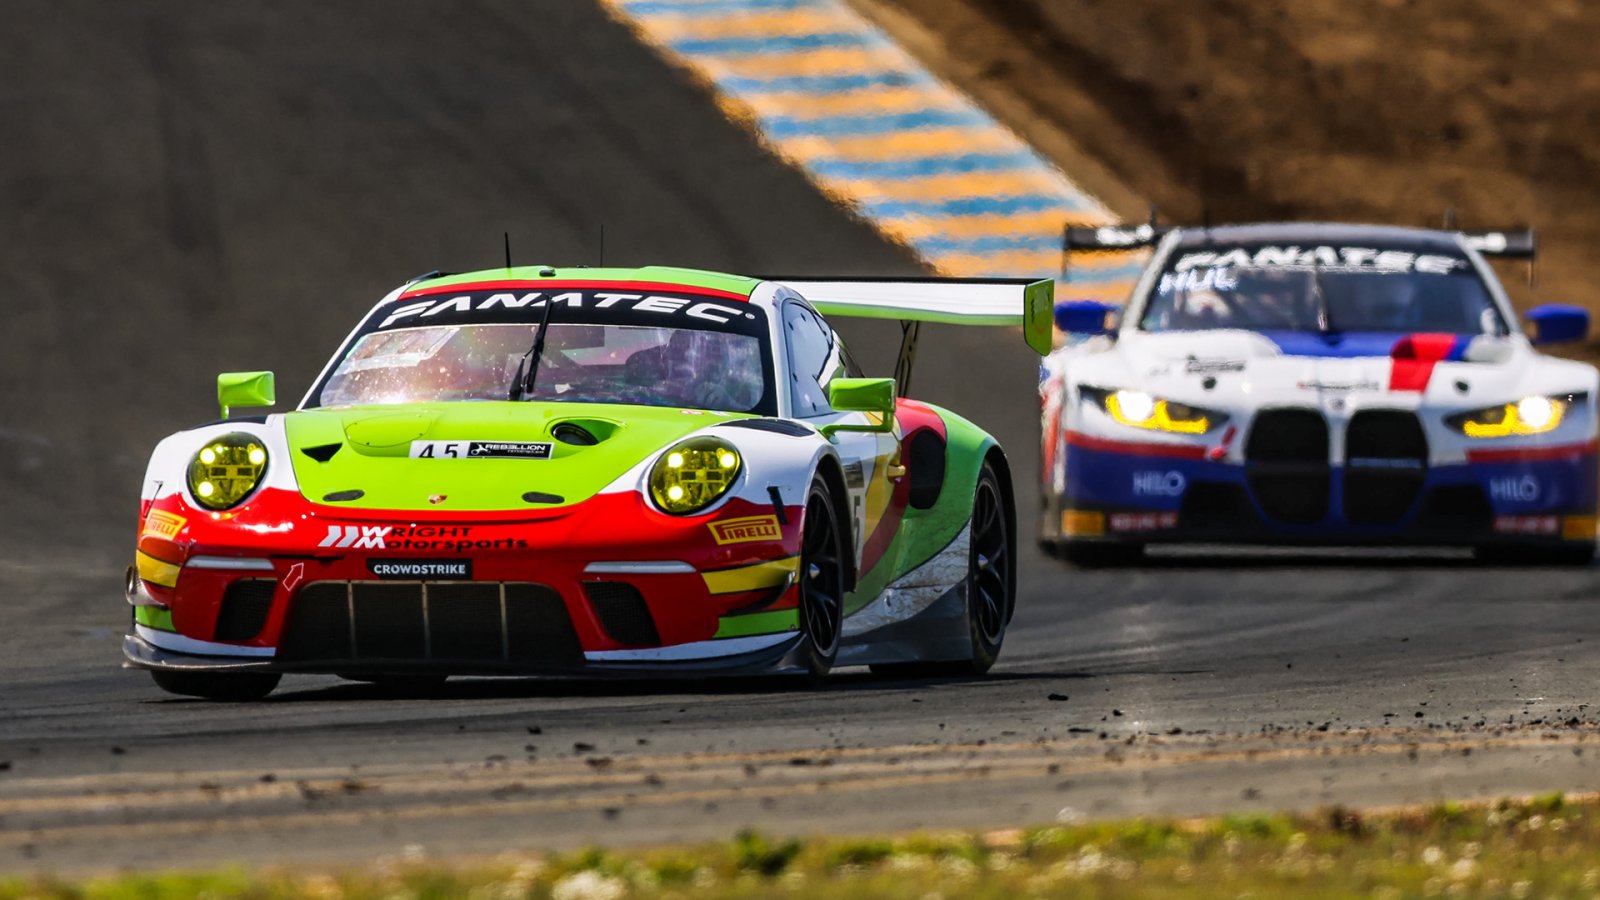 New Orleans Hosts GT Racing After Strong Season Opener in Sonoma